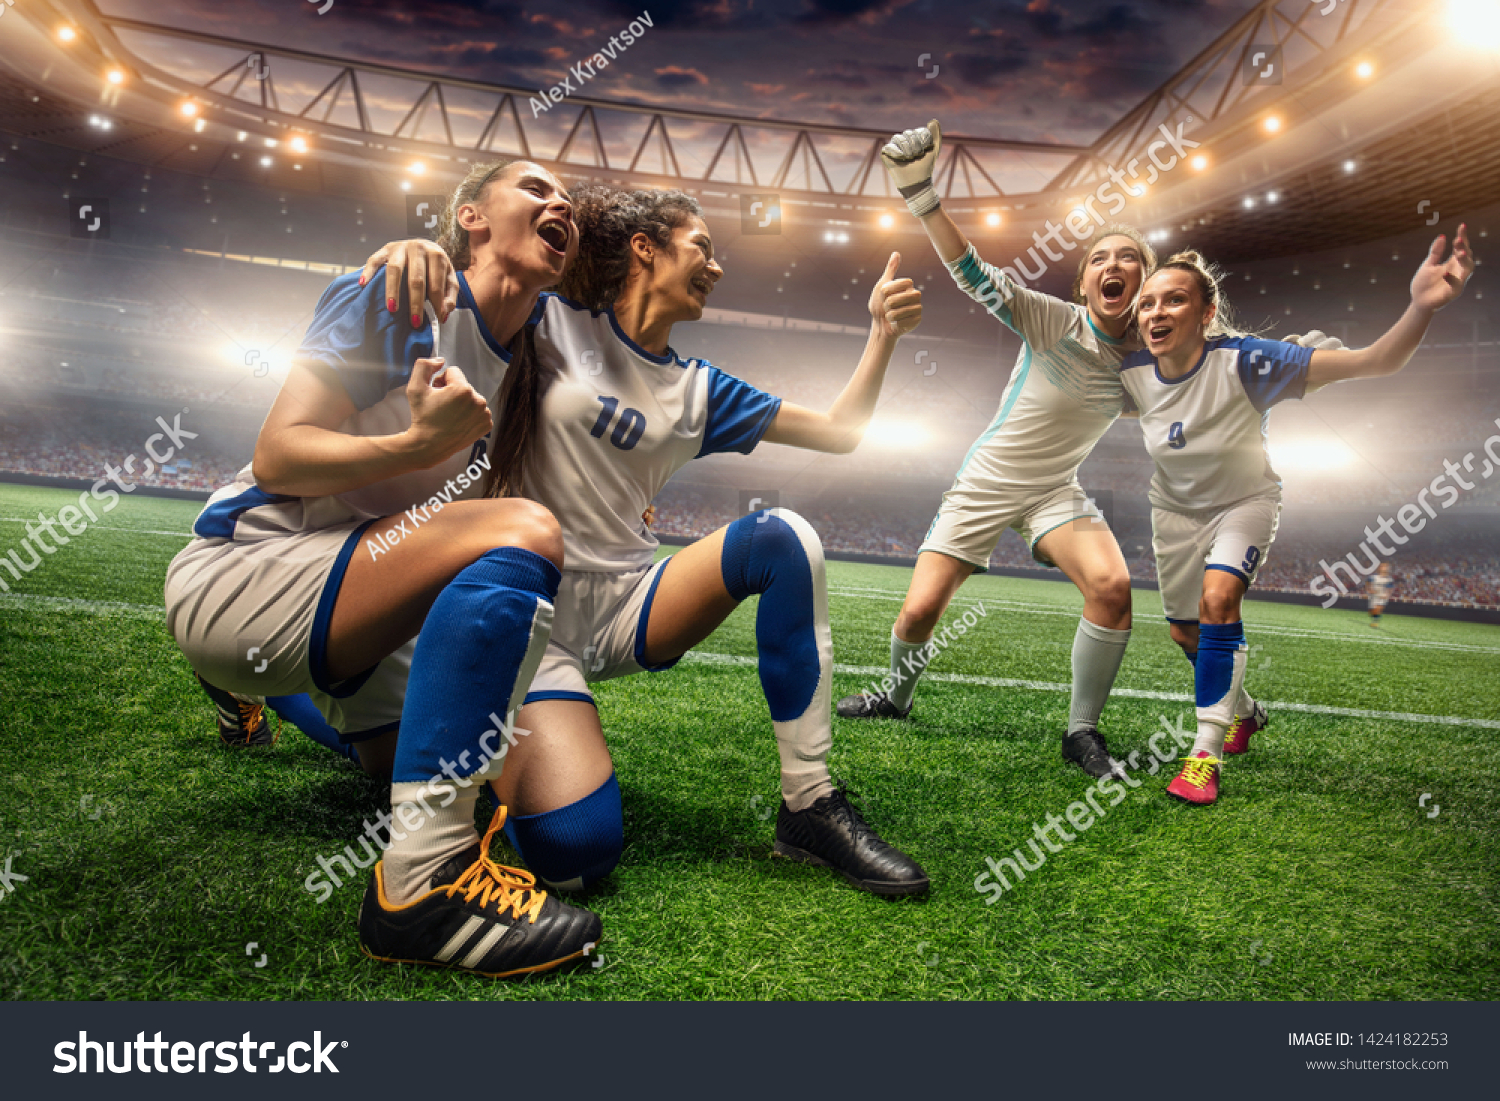 Happy Female Soccer players on a professional soccer stadium. Girls Team emotionally celebrates victory #1424182253